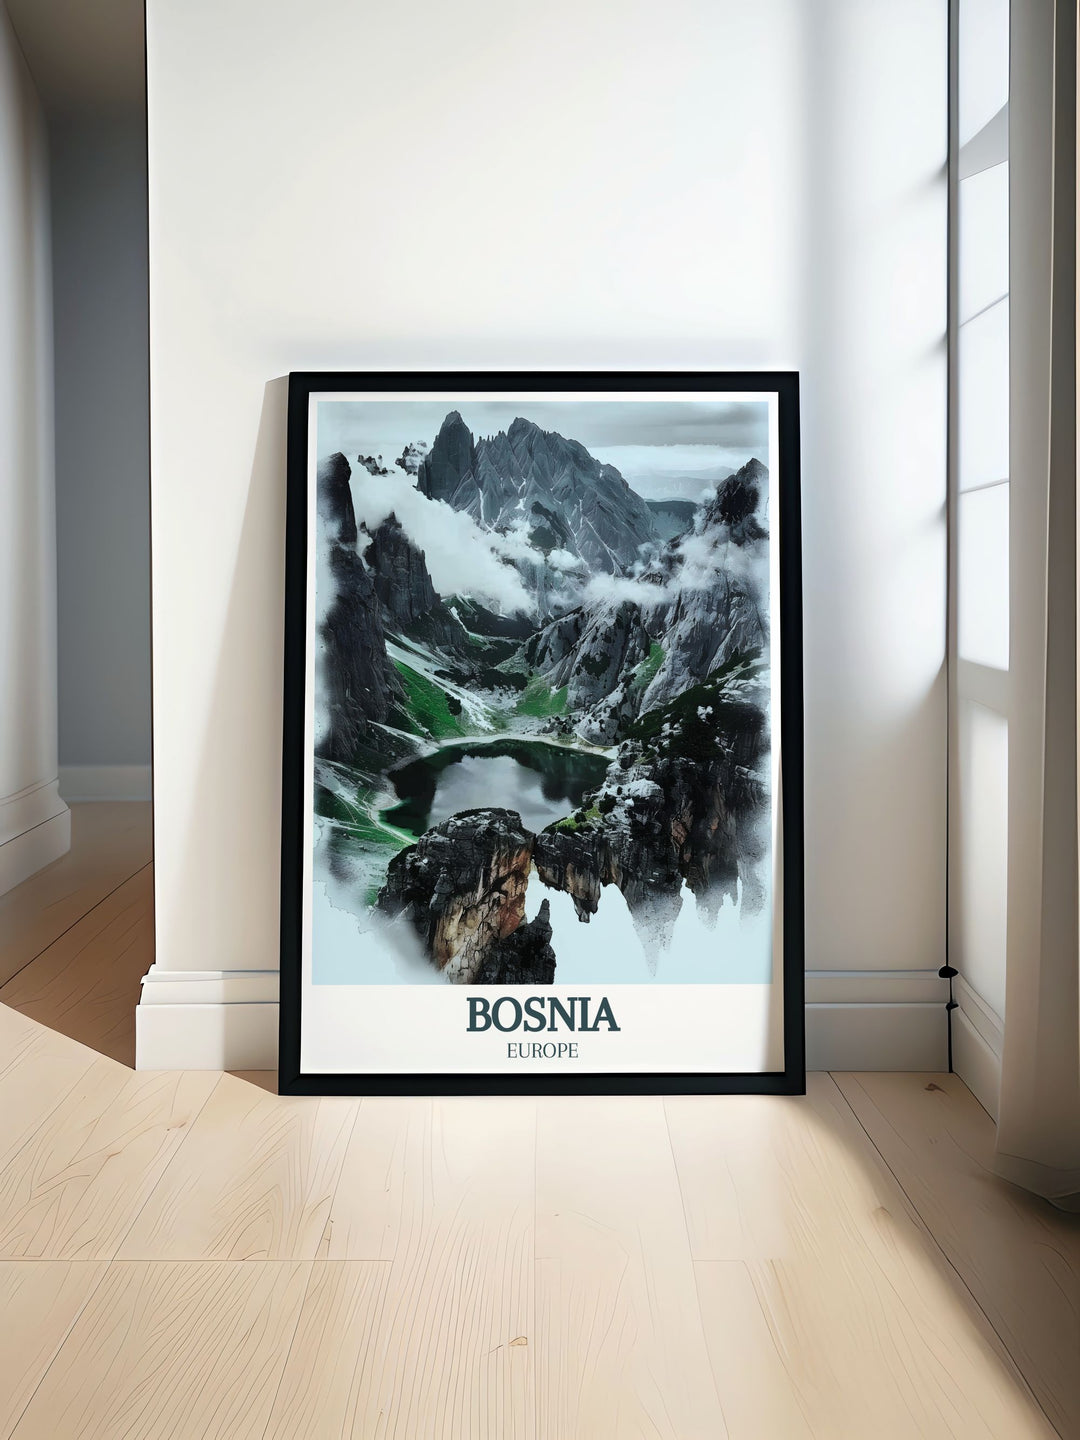 Sutjeska National Park, Maglić mountain, Trnovacko Lake captured in a beautiful Bosnia Poster. This Bosnia Wall Art showcases the breathtaking landscapes of Bosnia making it a perfect addition to home decor or as a meaningful gift for nature enthusiasts.